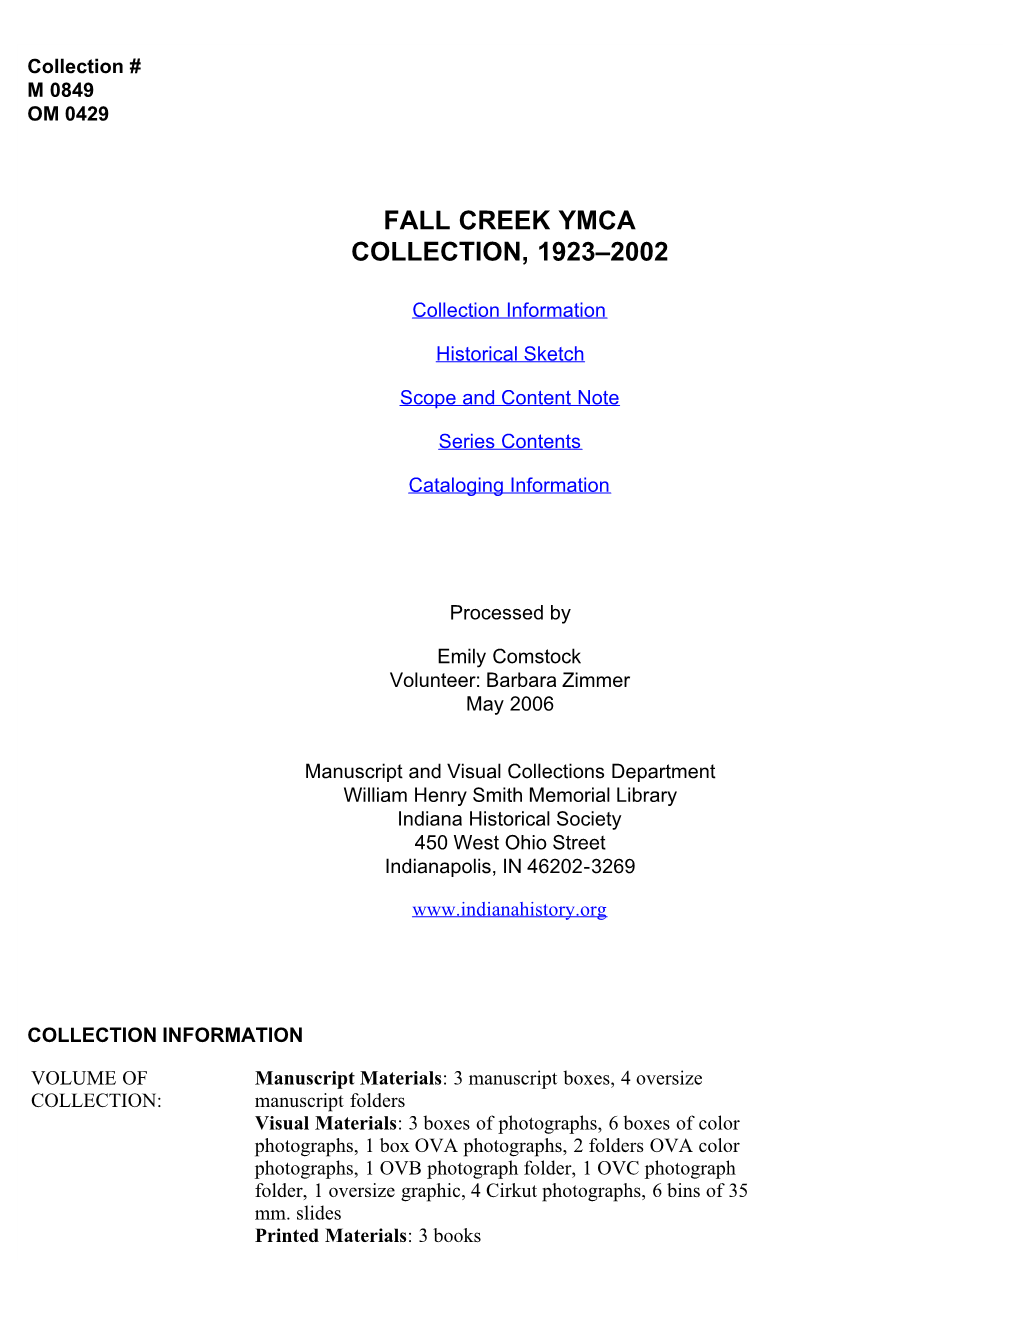 Fall Creek Ymca Collection, 1923-2002